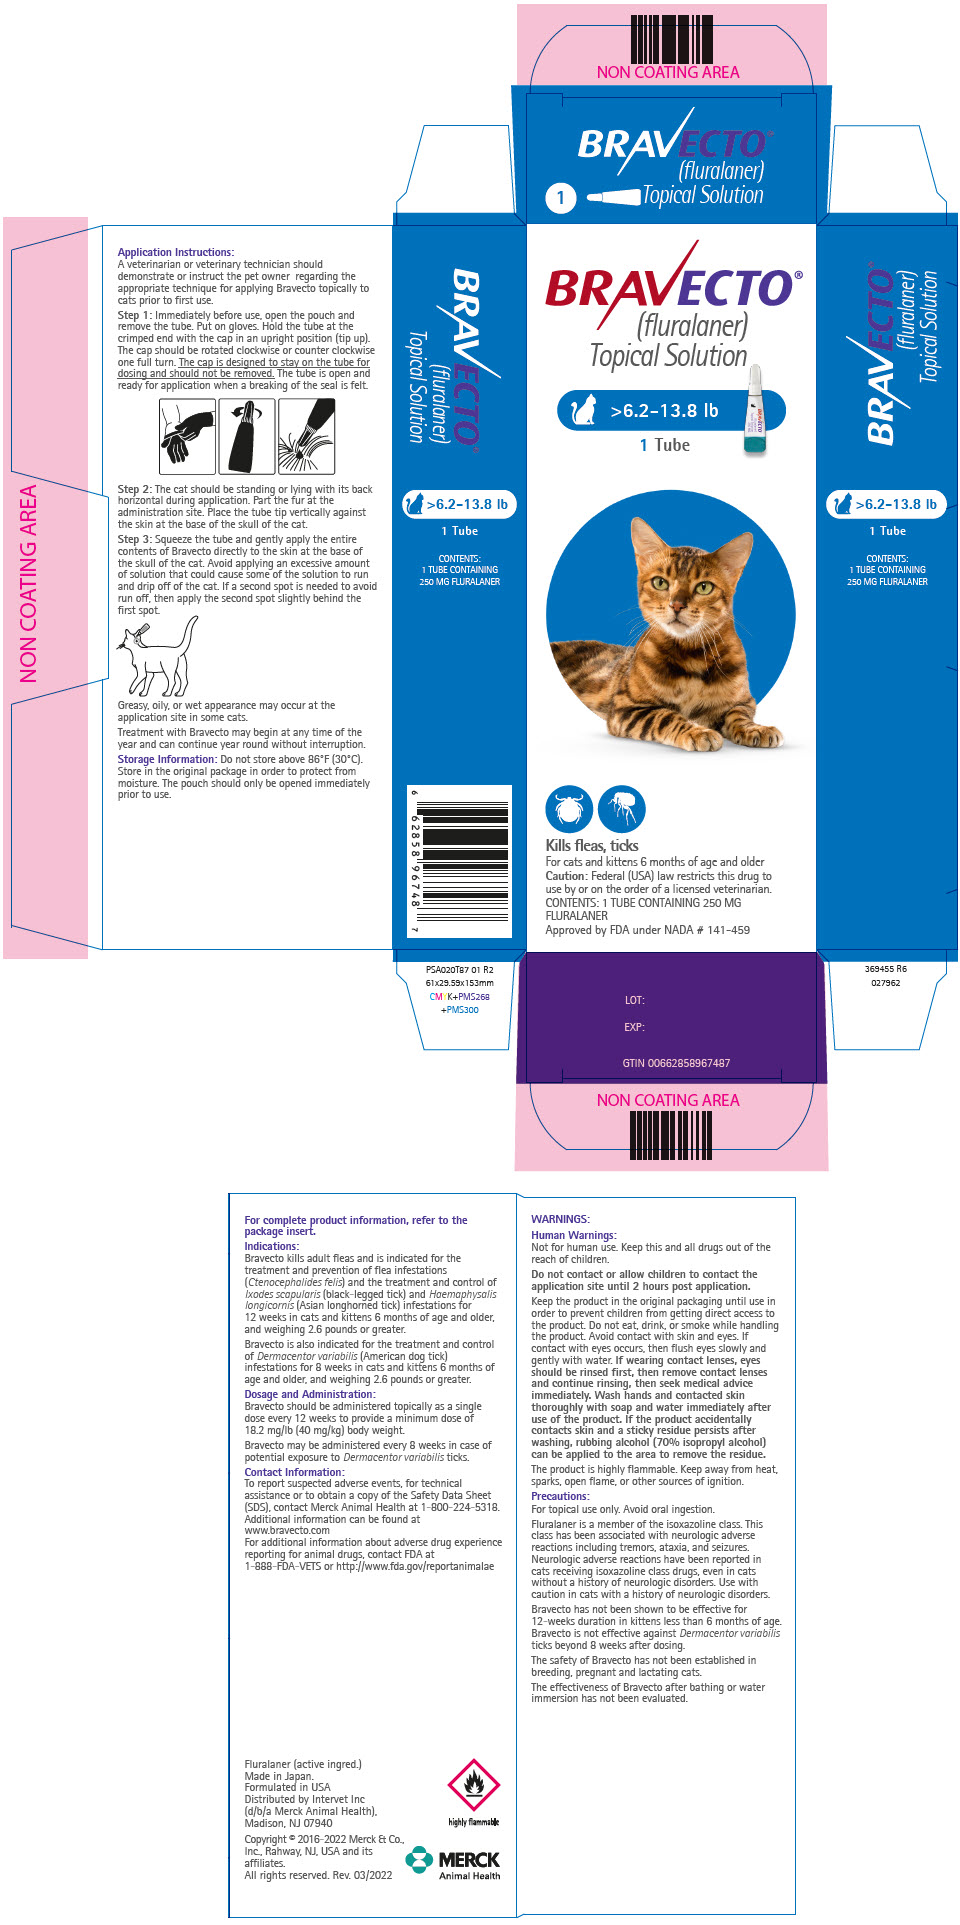 BRAVECTO® (fluralaner topical solution) for Cats